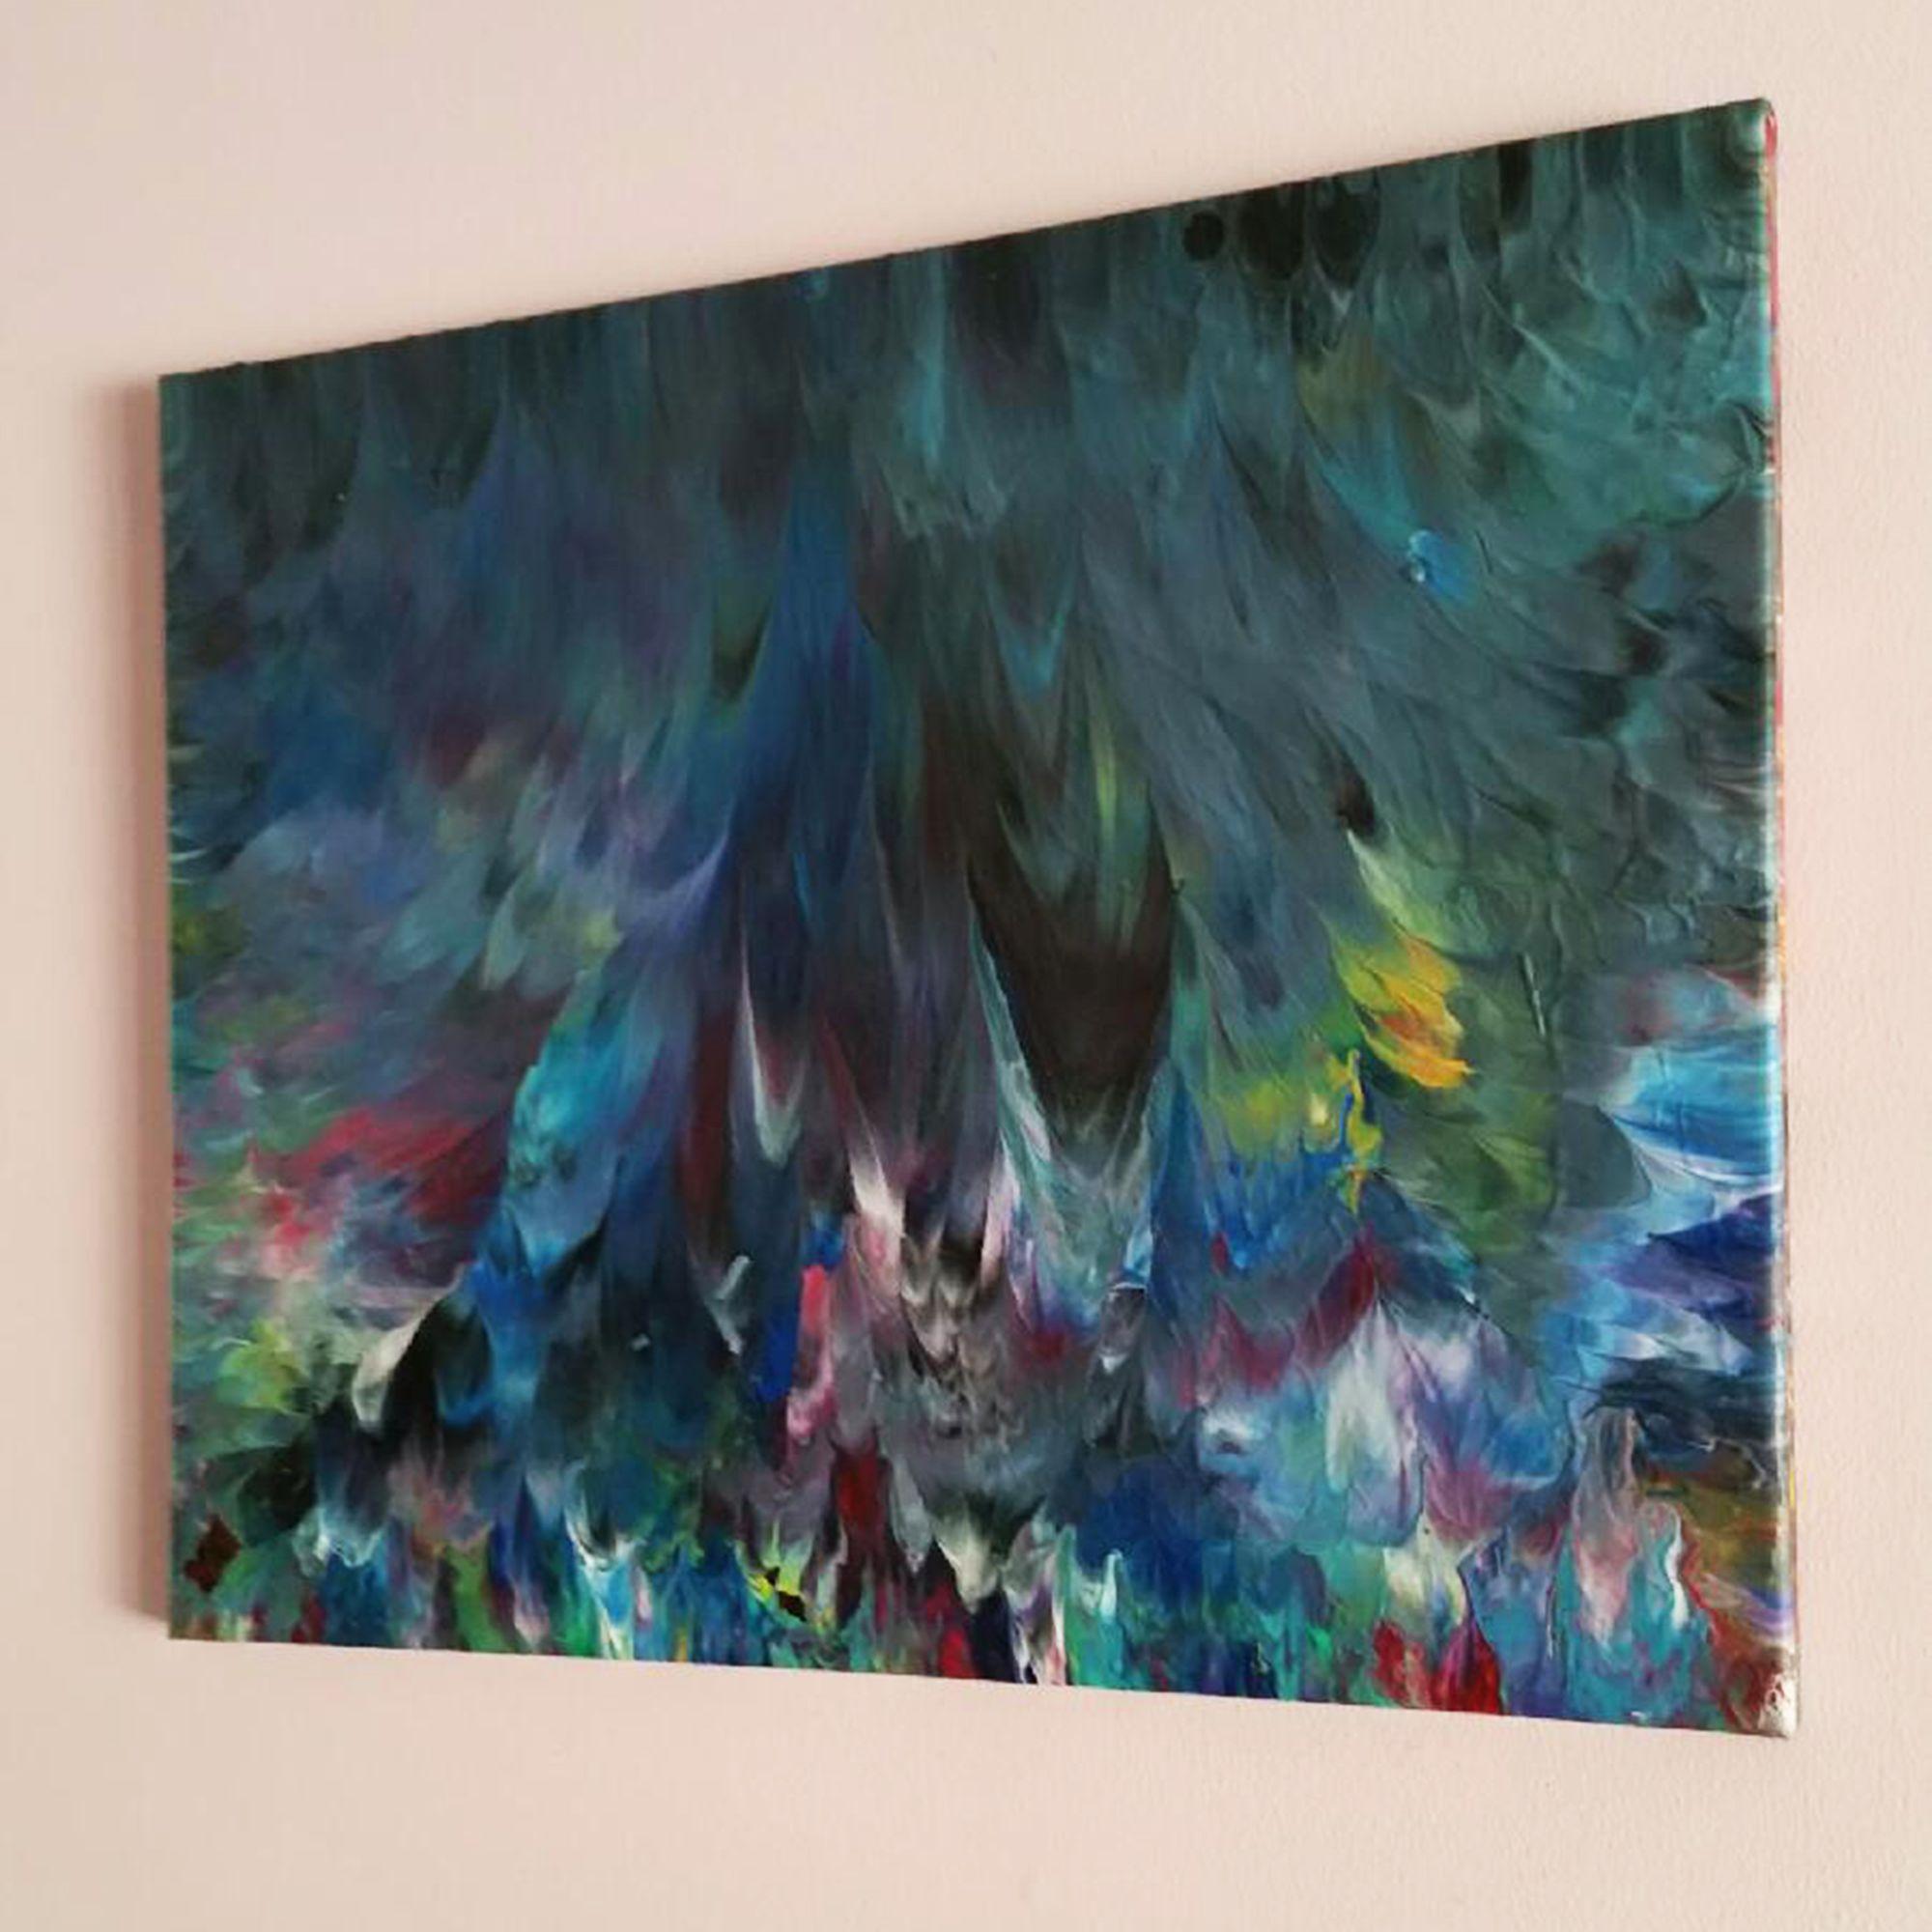 'Morning Glory' is an abstract painting with a unique texture and a stunning colour palette primarily comprised of dark blue tones and black with refreshing turquoise and vibrant accent colours.    Original Painting  Created in 2018  Acrylic on